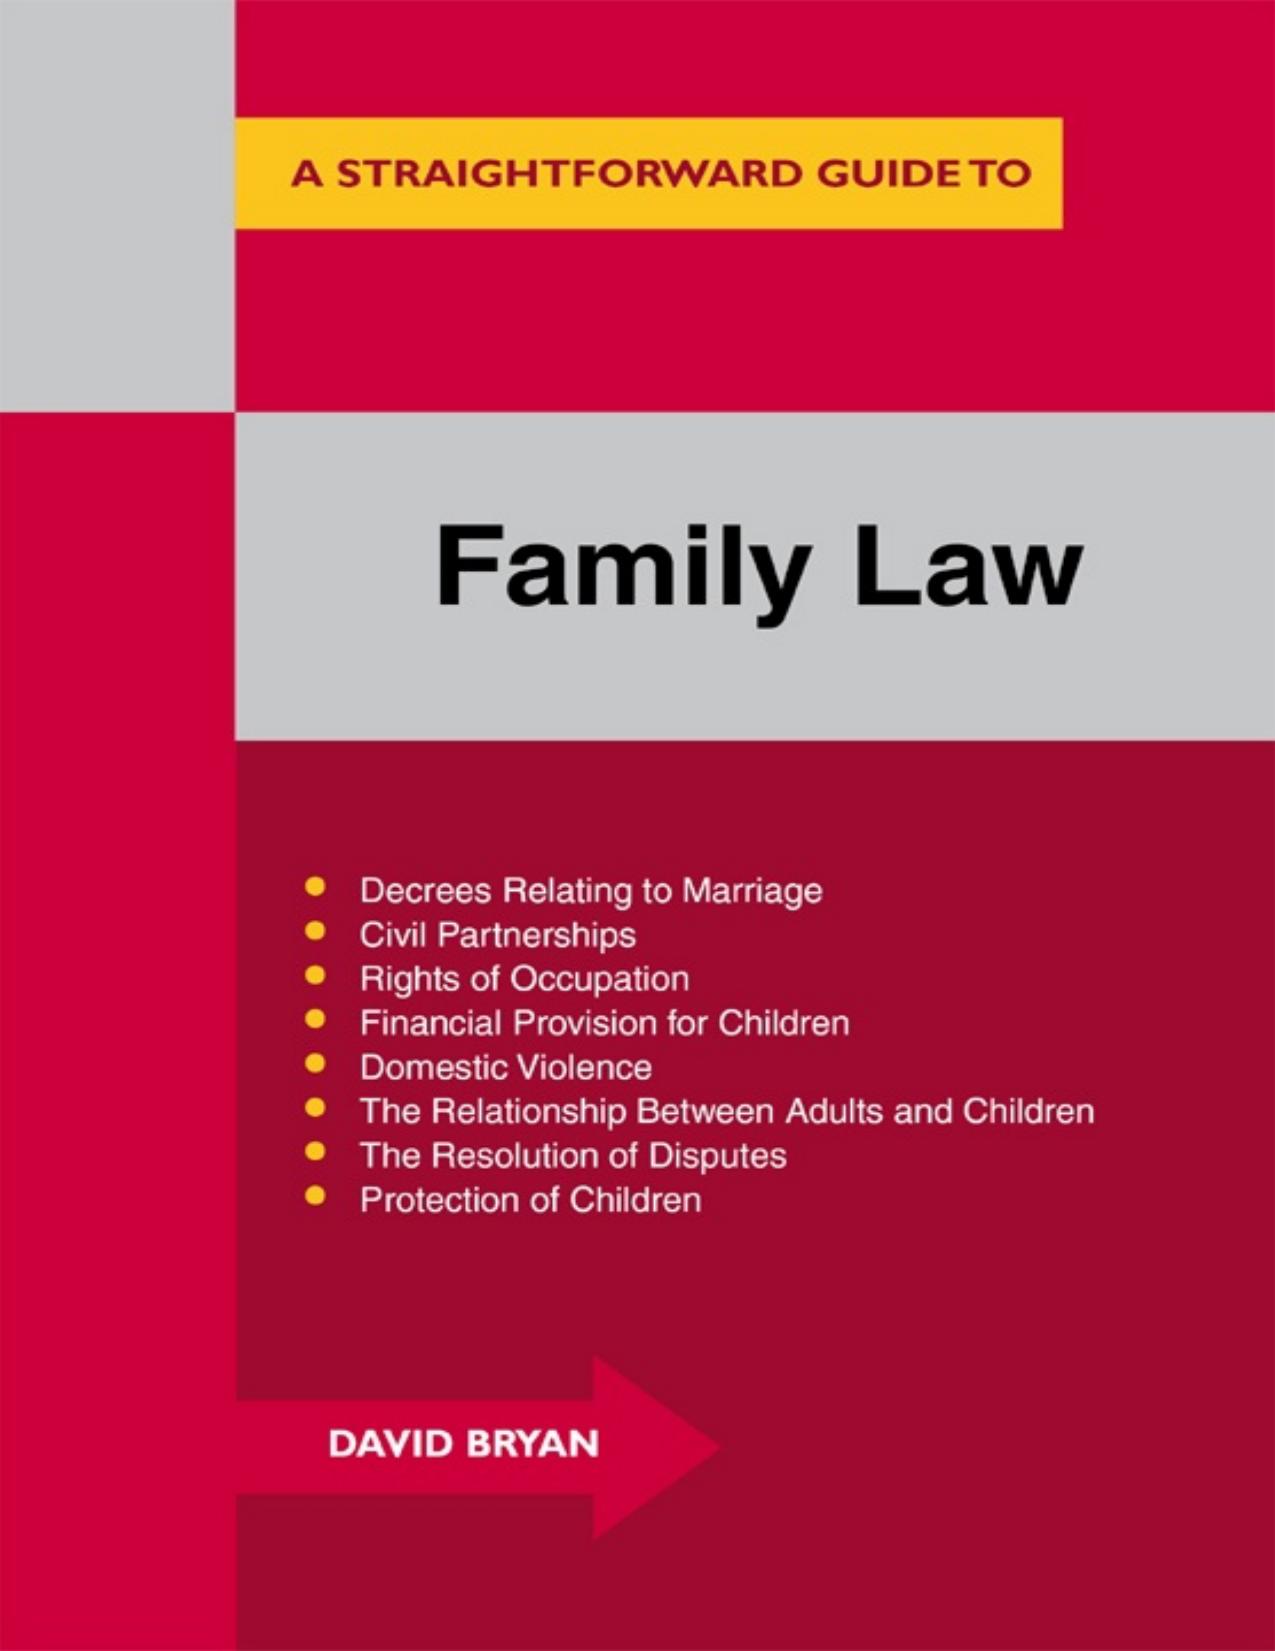 A Straightforward Guide to Family Law: A Concise Introduction to All Aspects of Family Law - PDFDrive.com